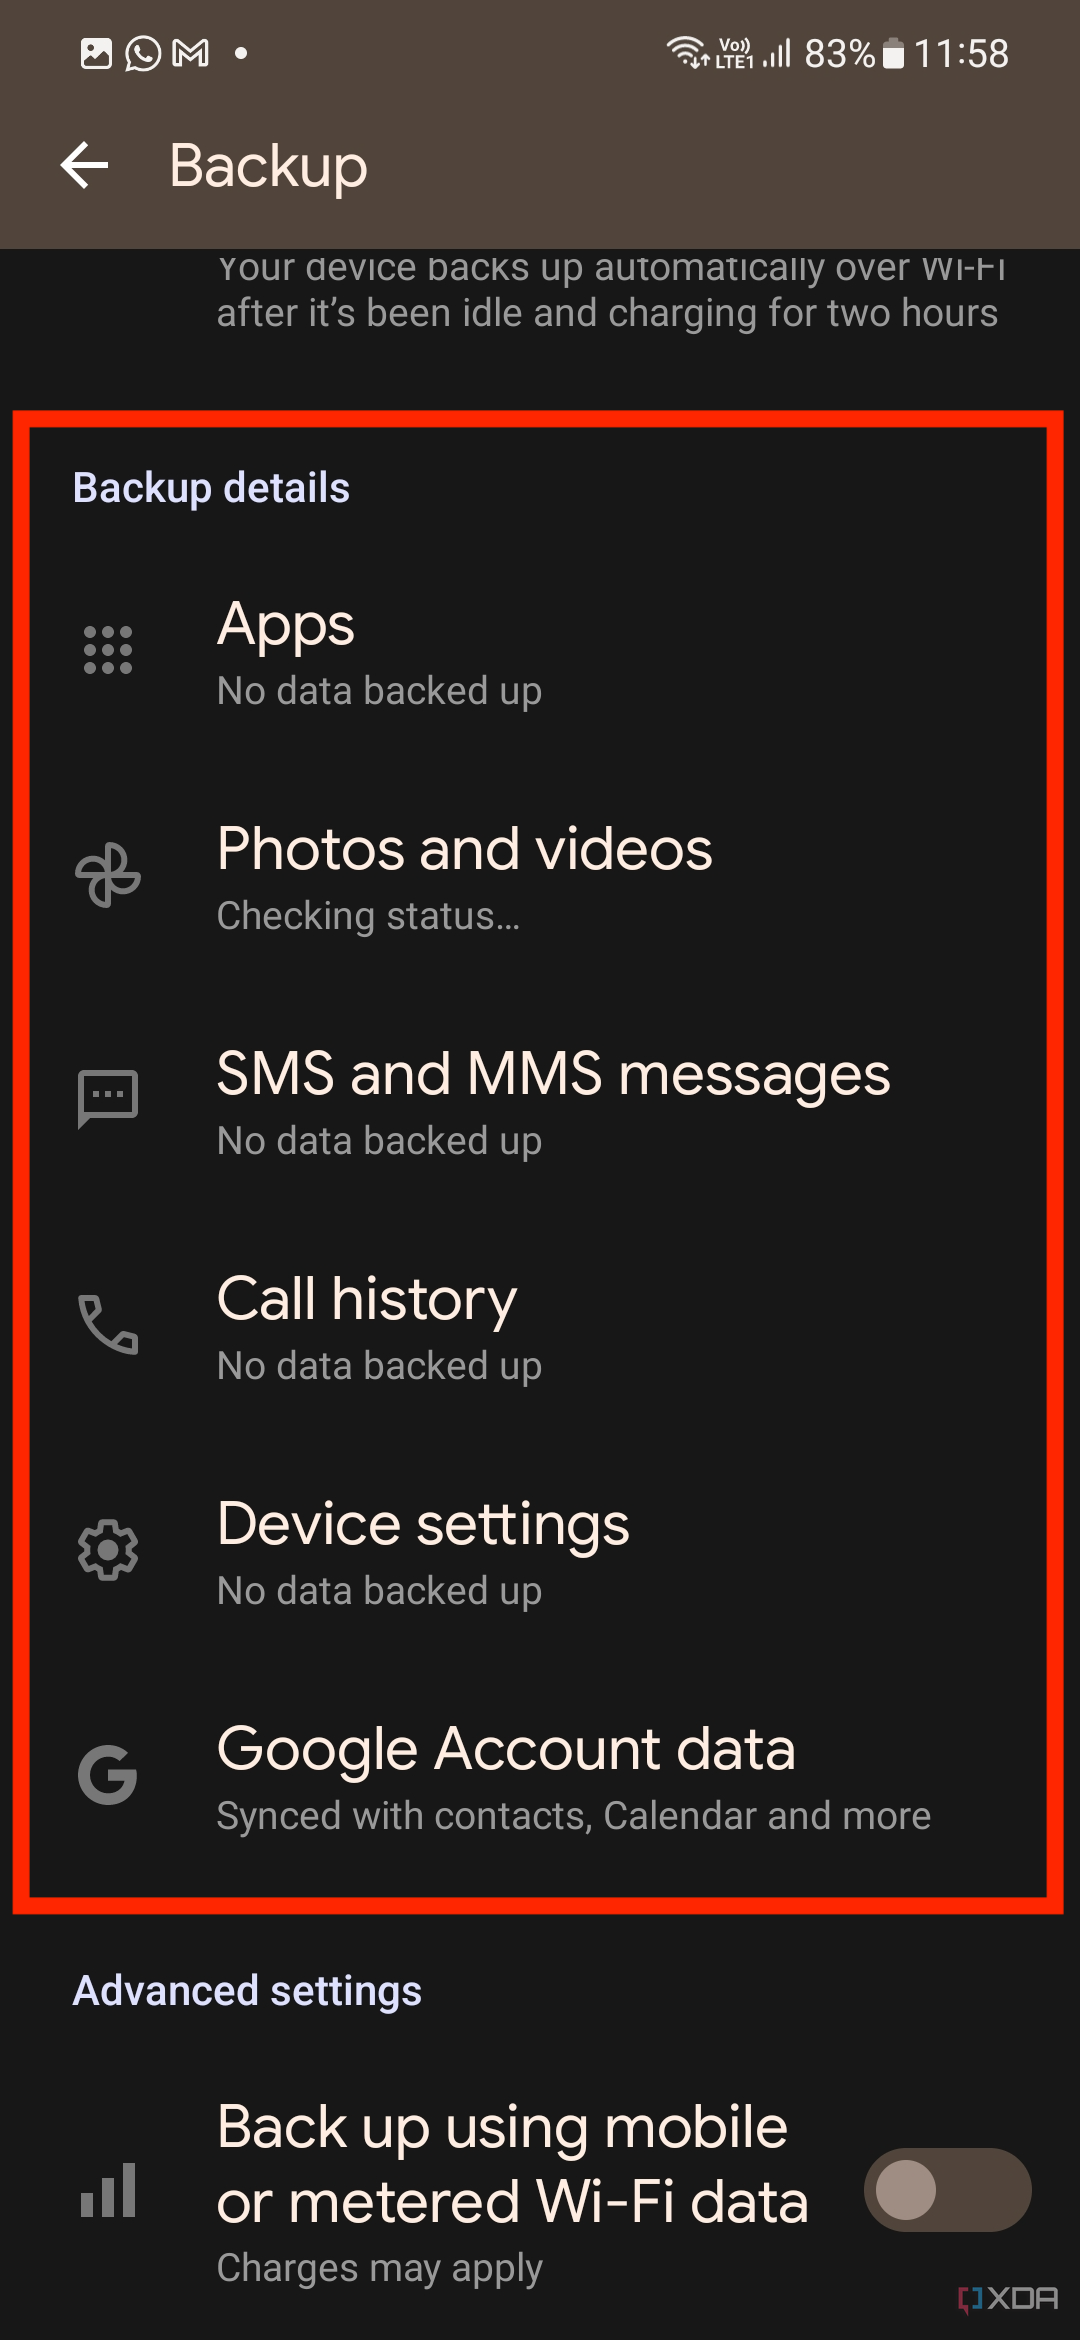 A screenshot showing the backup details in Google One app on Android.